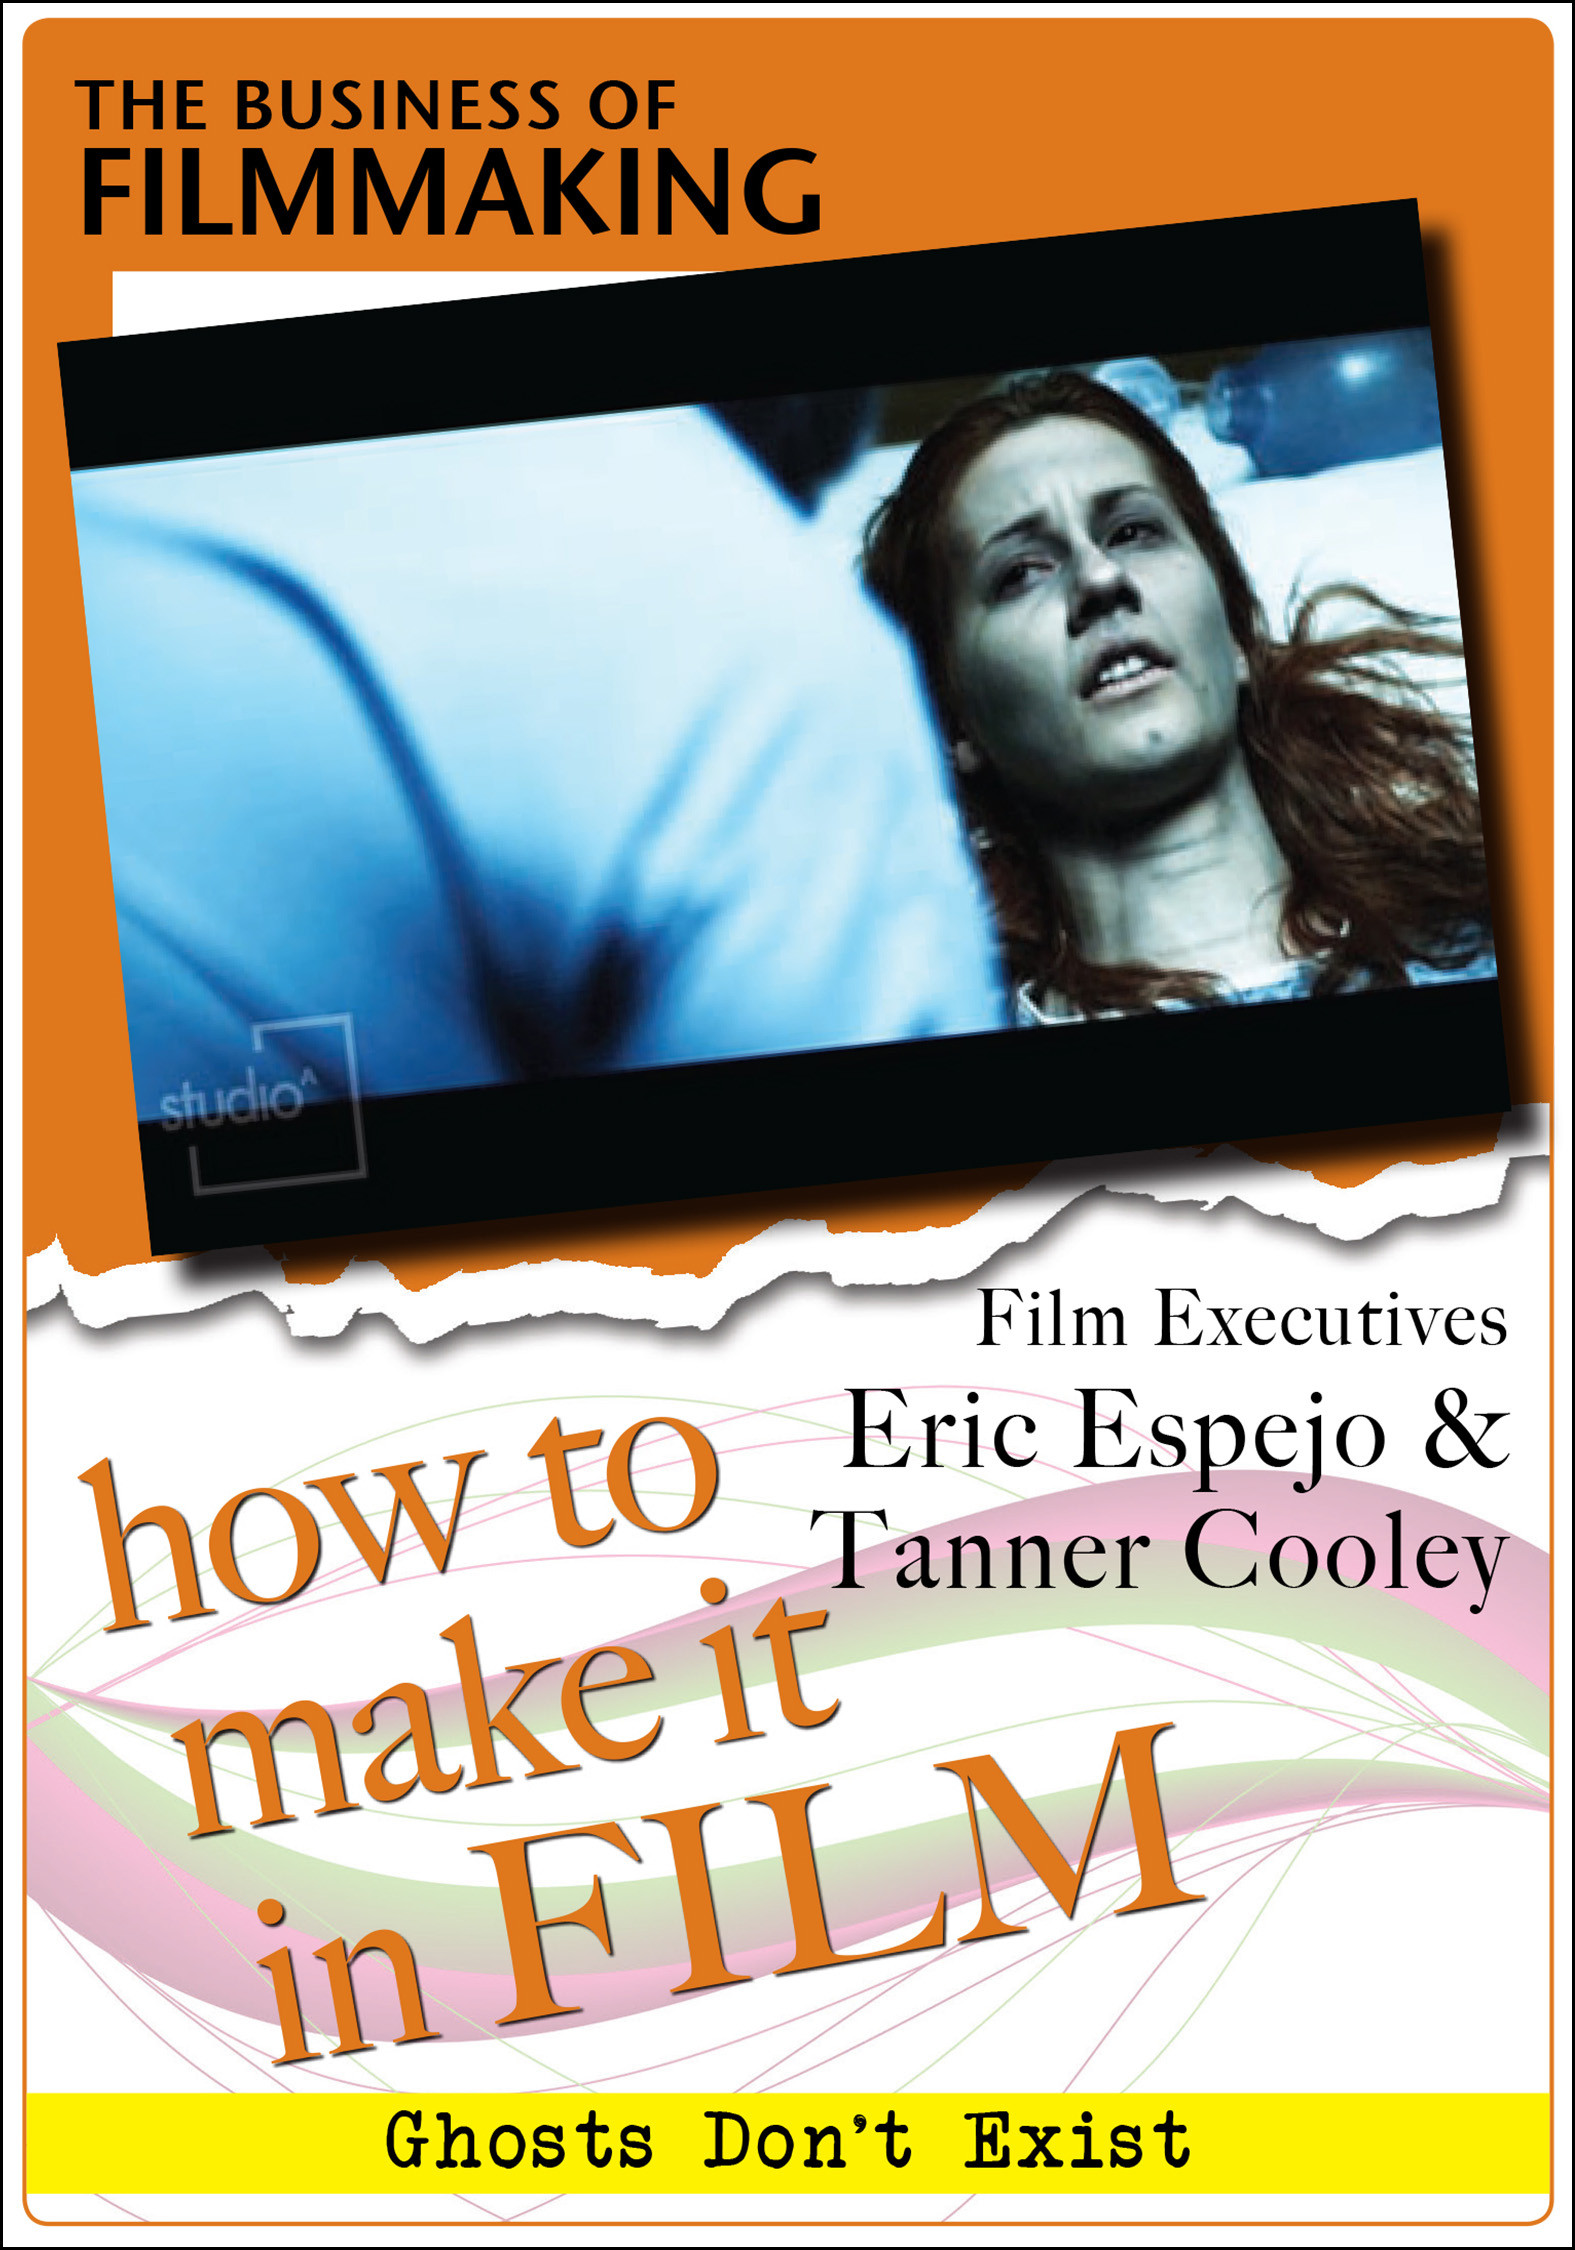 F2833 - The Business of Film Film with Executives Eric Espejo with Tanner Cooley